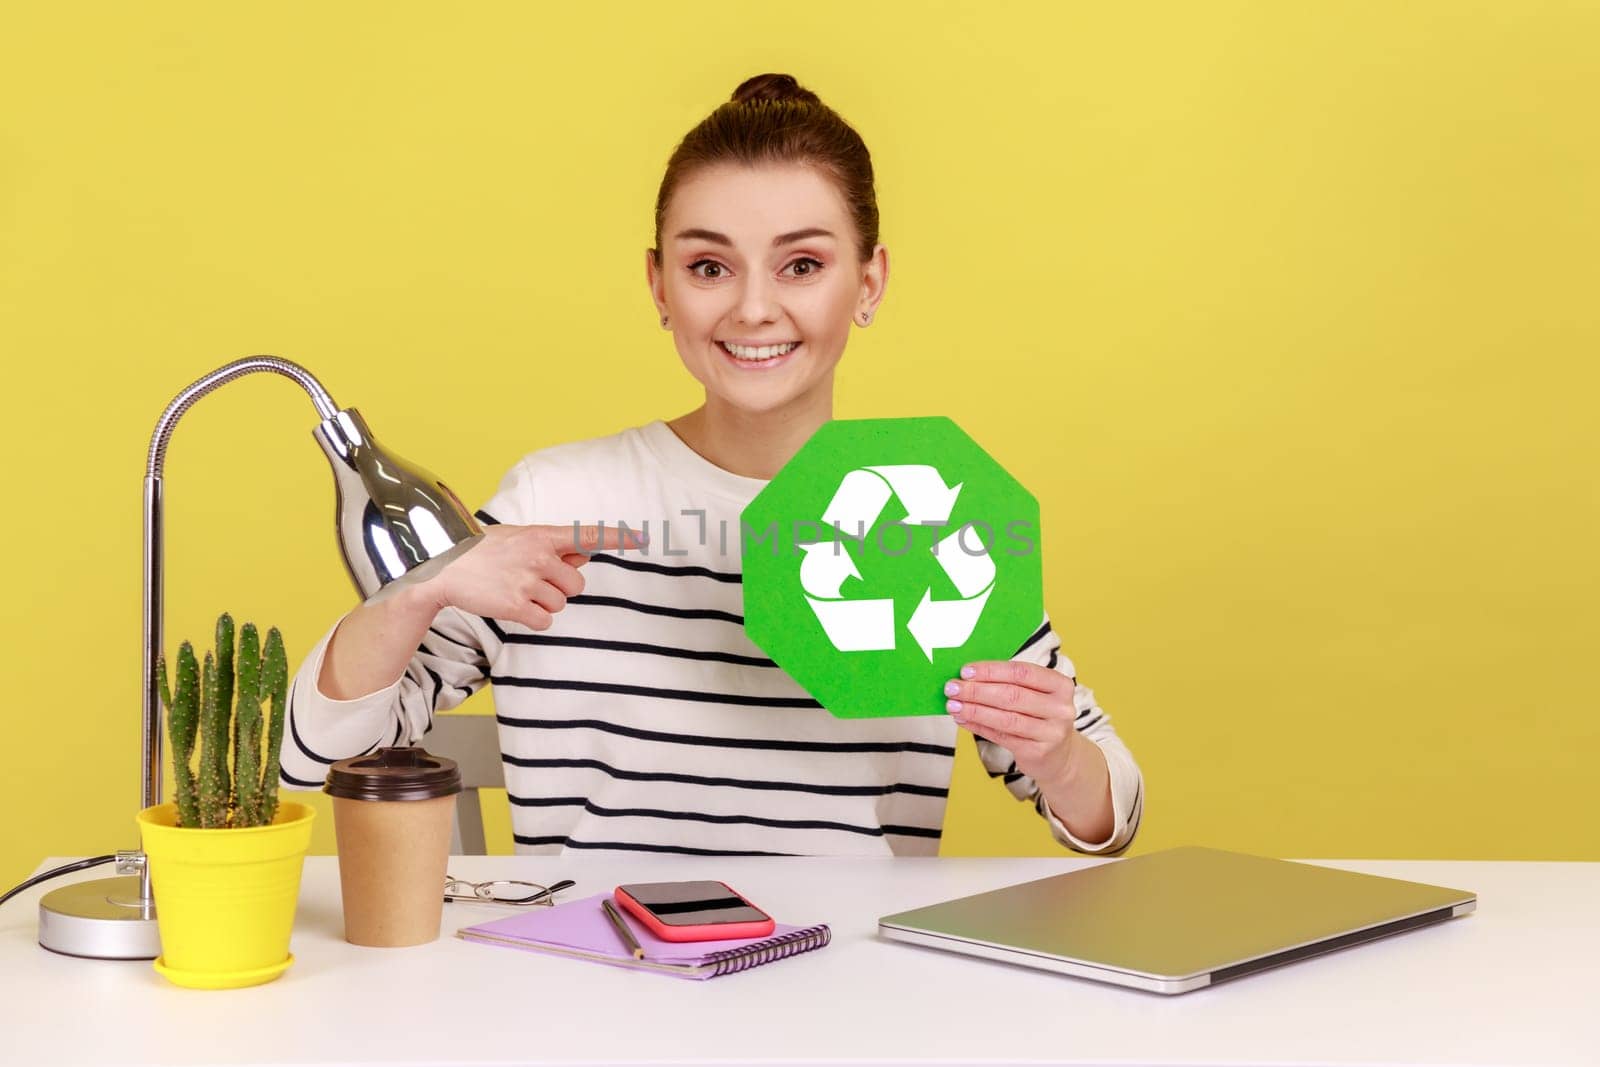 Positive satisfied woman pointing at green recycling symbol in her hands, ecology concept, sitting on workplace with laptop. Indoor studio studio shot isolated on yellow background.